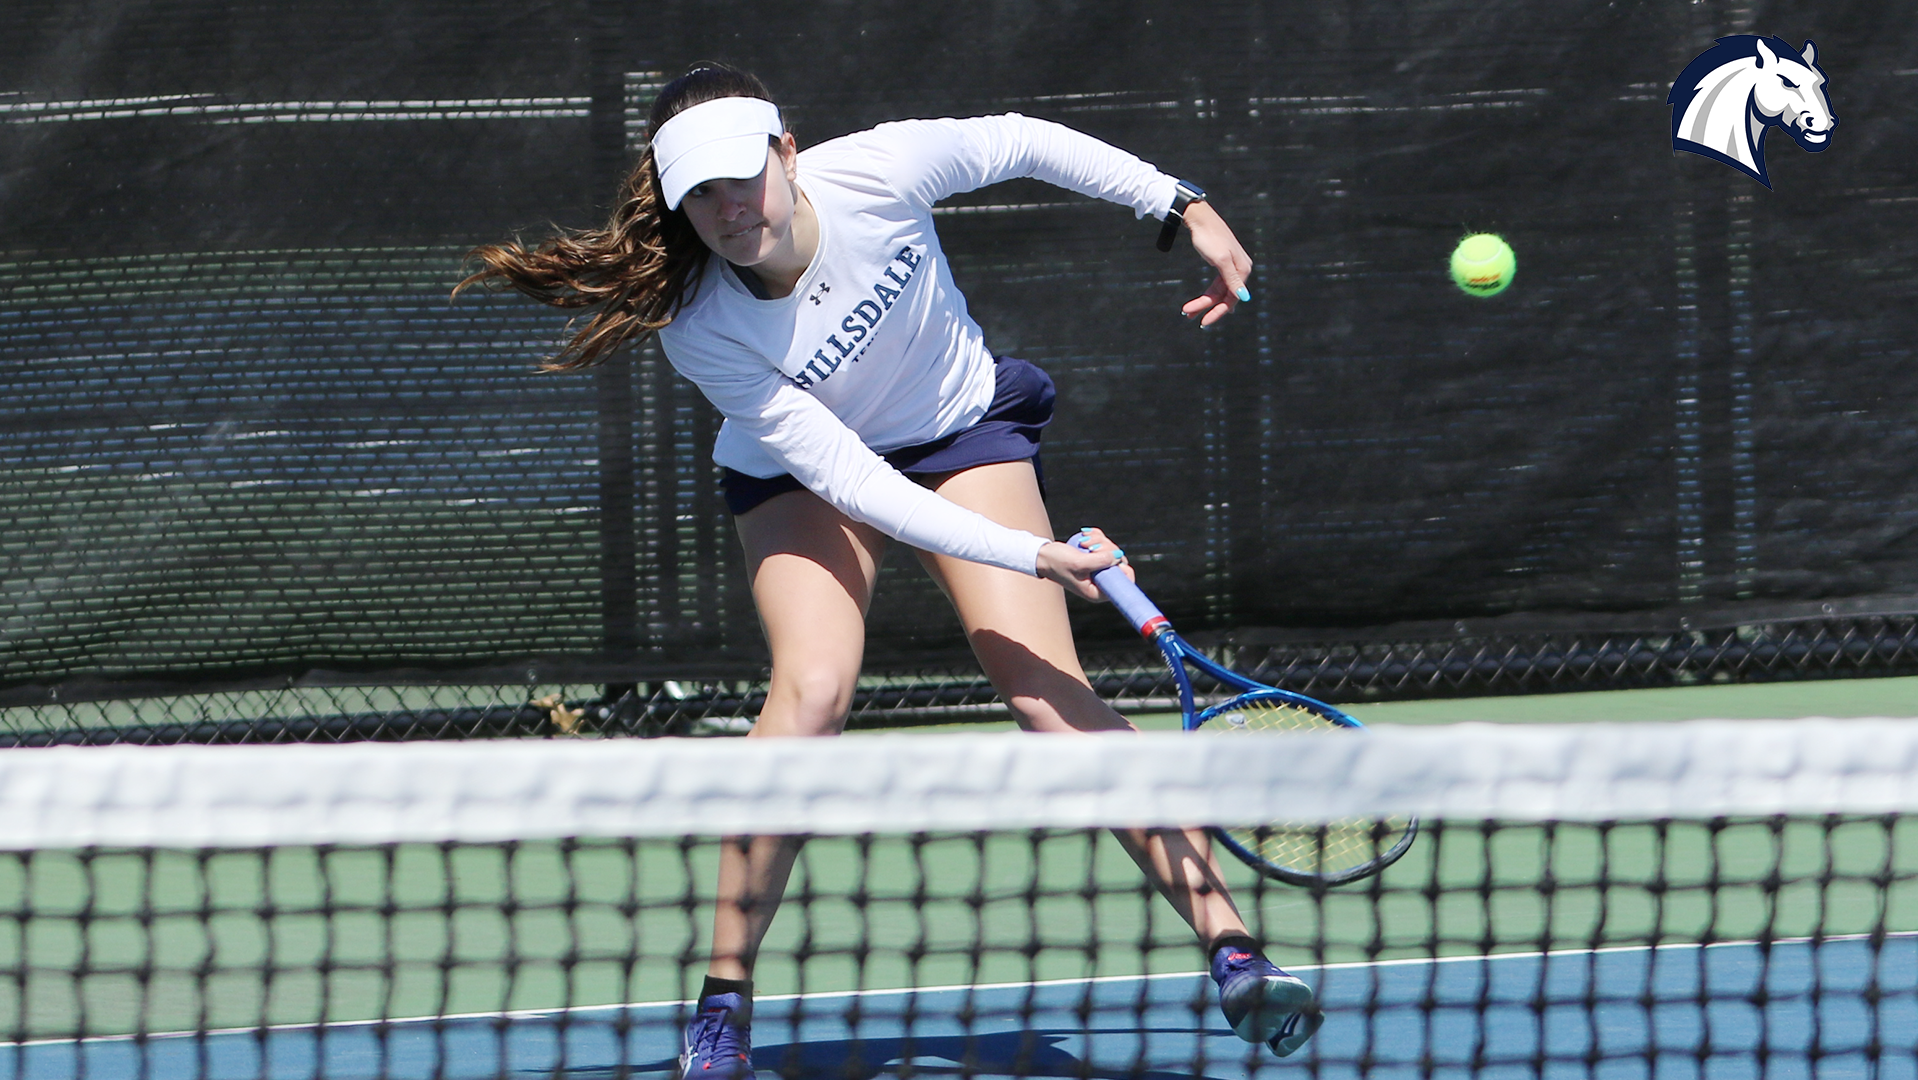 Seniors come up big in singles for Hillsdale as Chargers beat Northwood, 5-2, in final home match